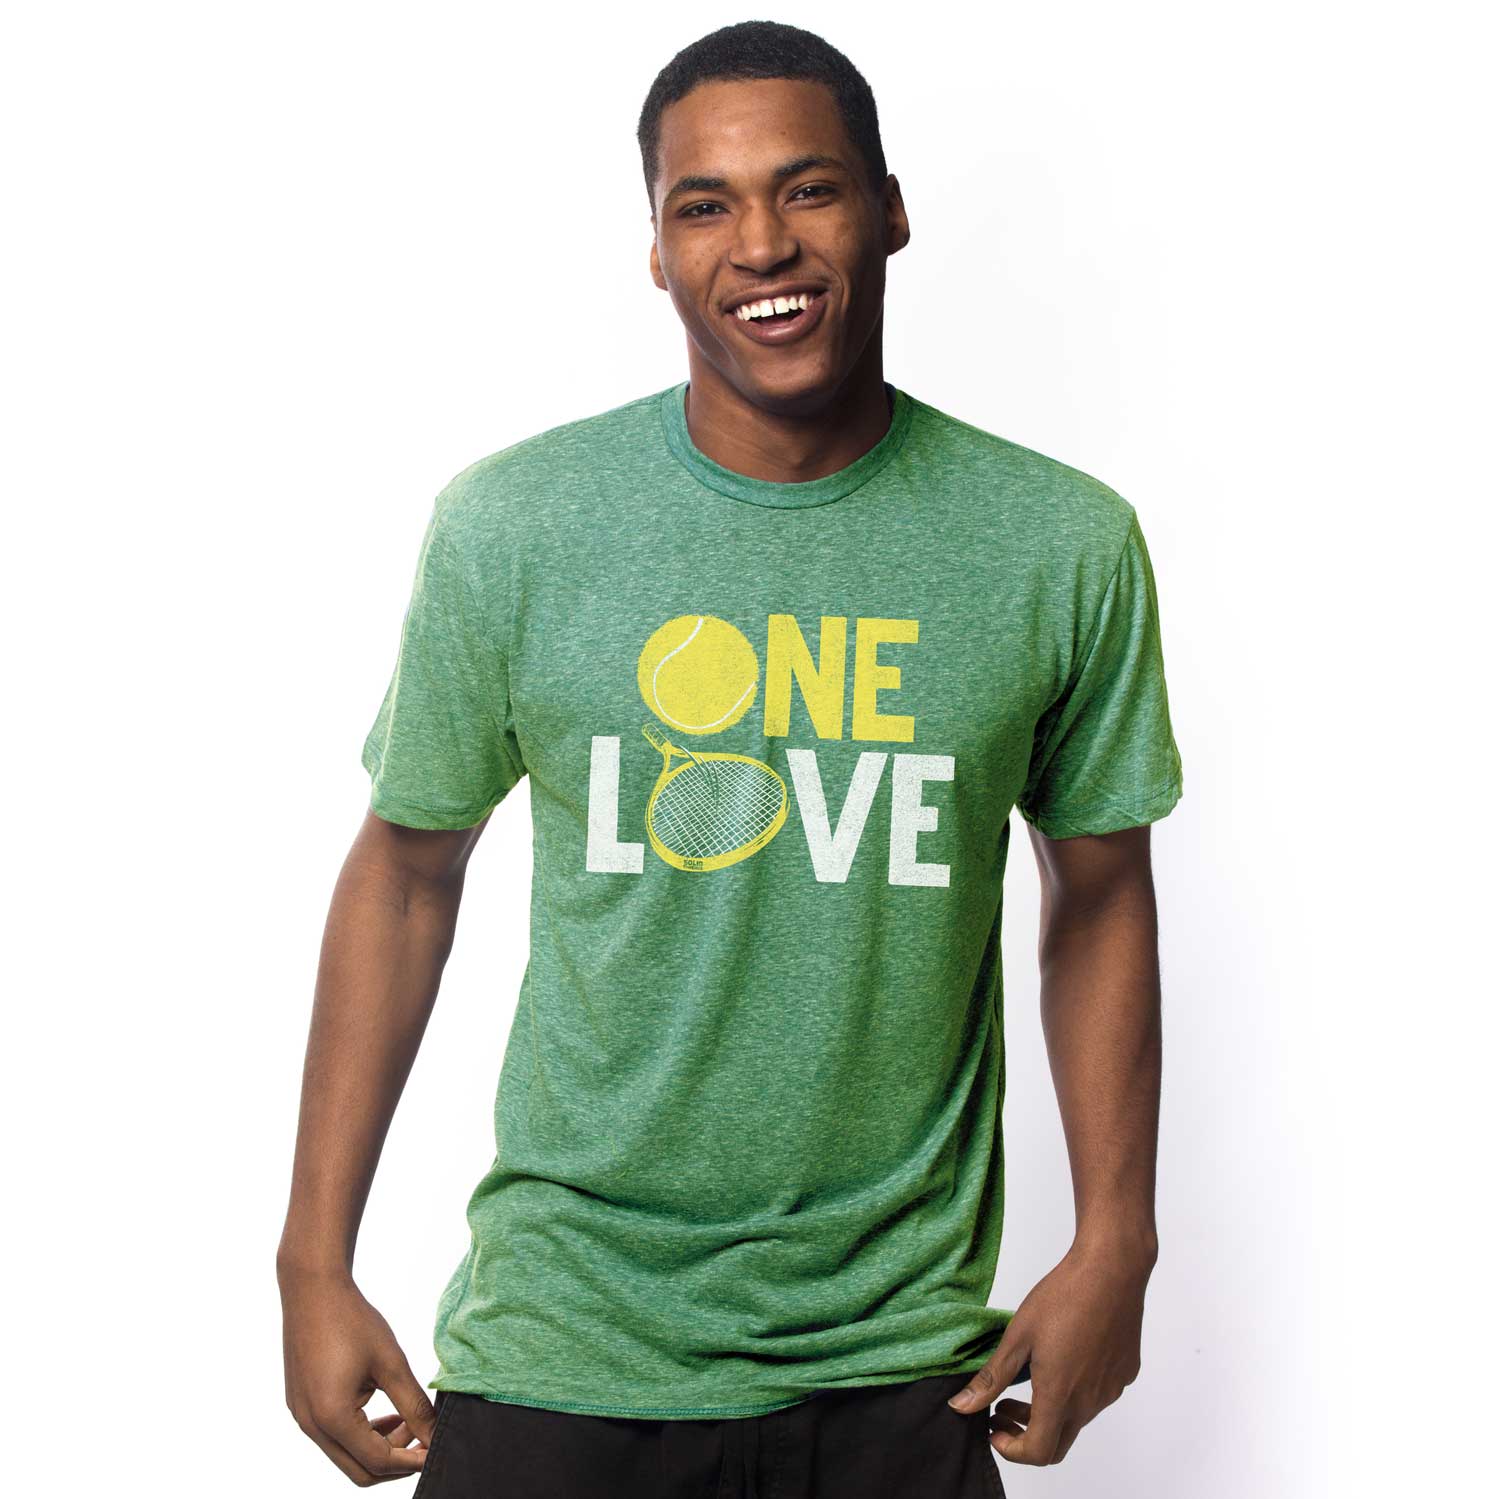 One Love Vintage Retro Graphic T-Shirt | Funny Tennis Tee | Solid Threads